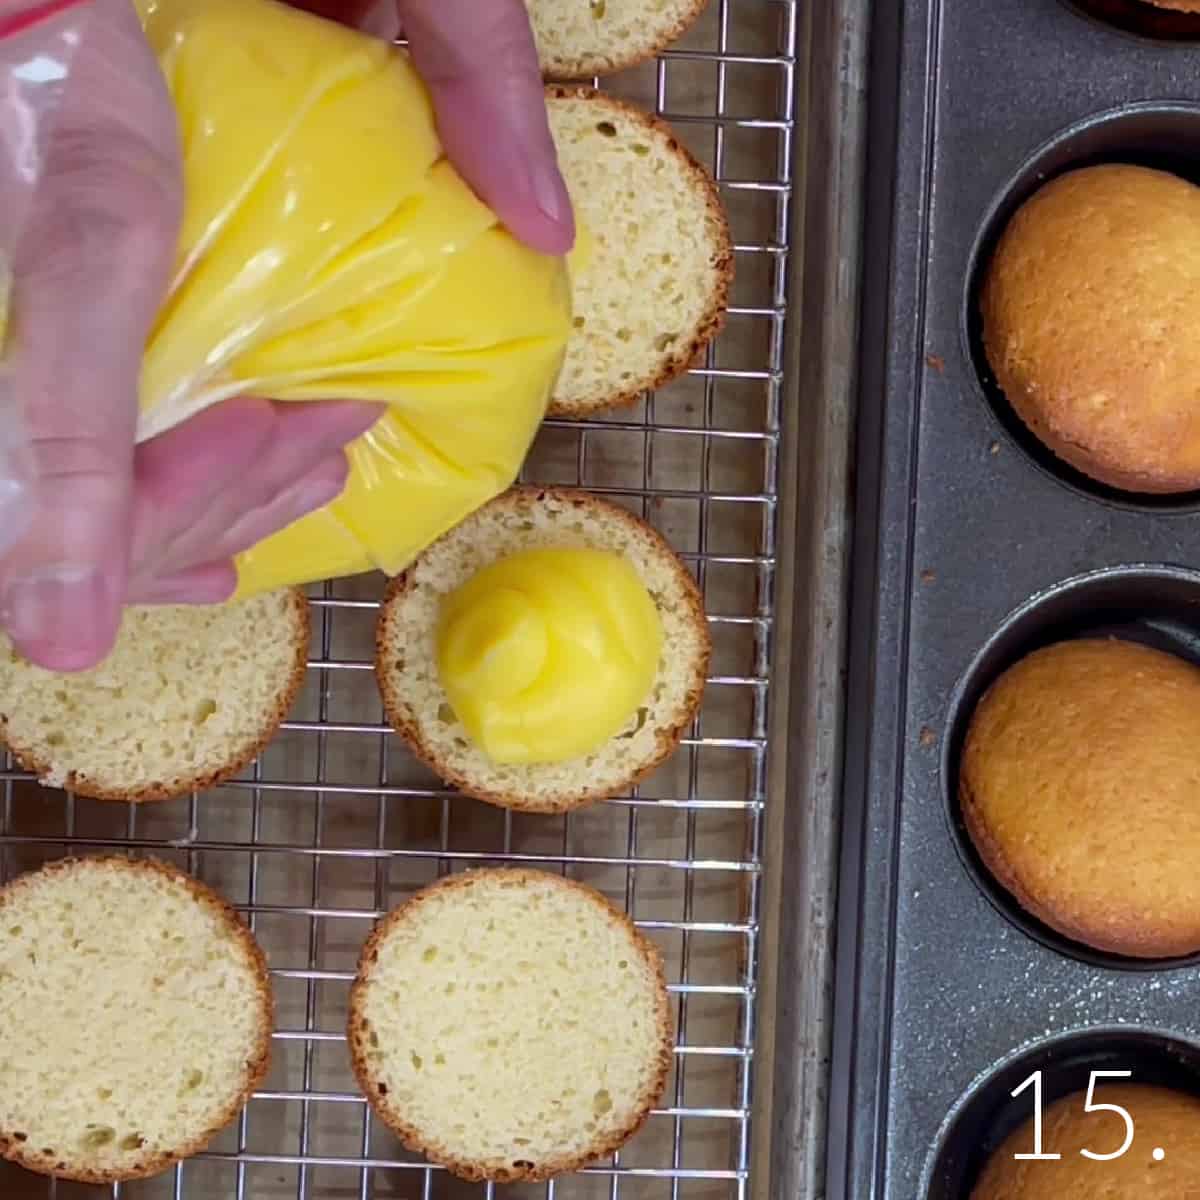 Vanilla pudding in a plastic bag being piped onto one side of a Boston Cream Cupcake.